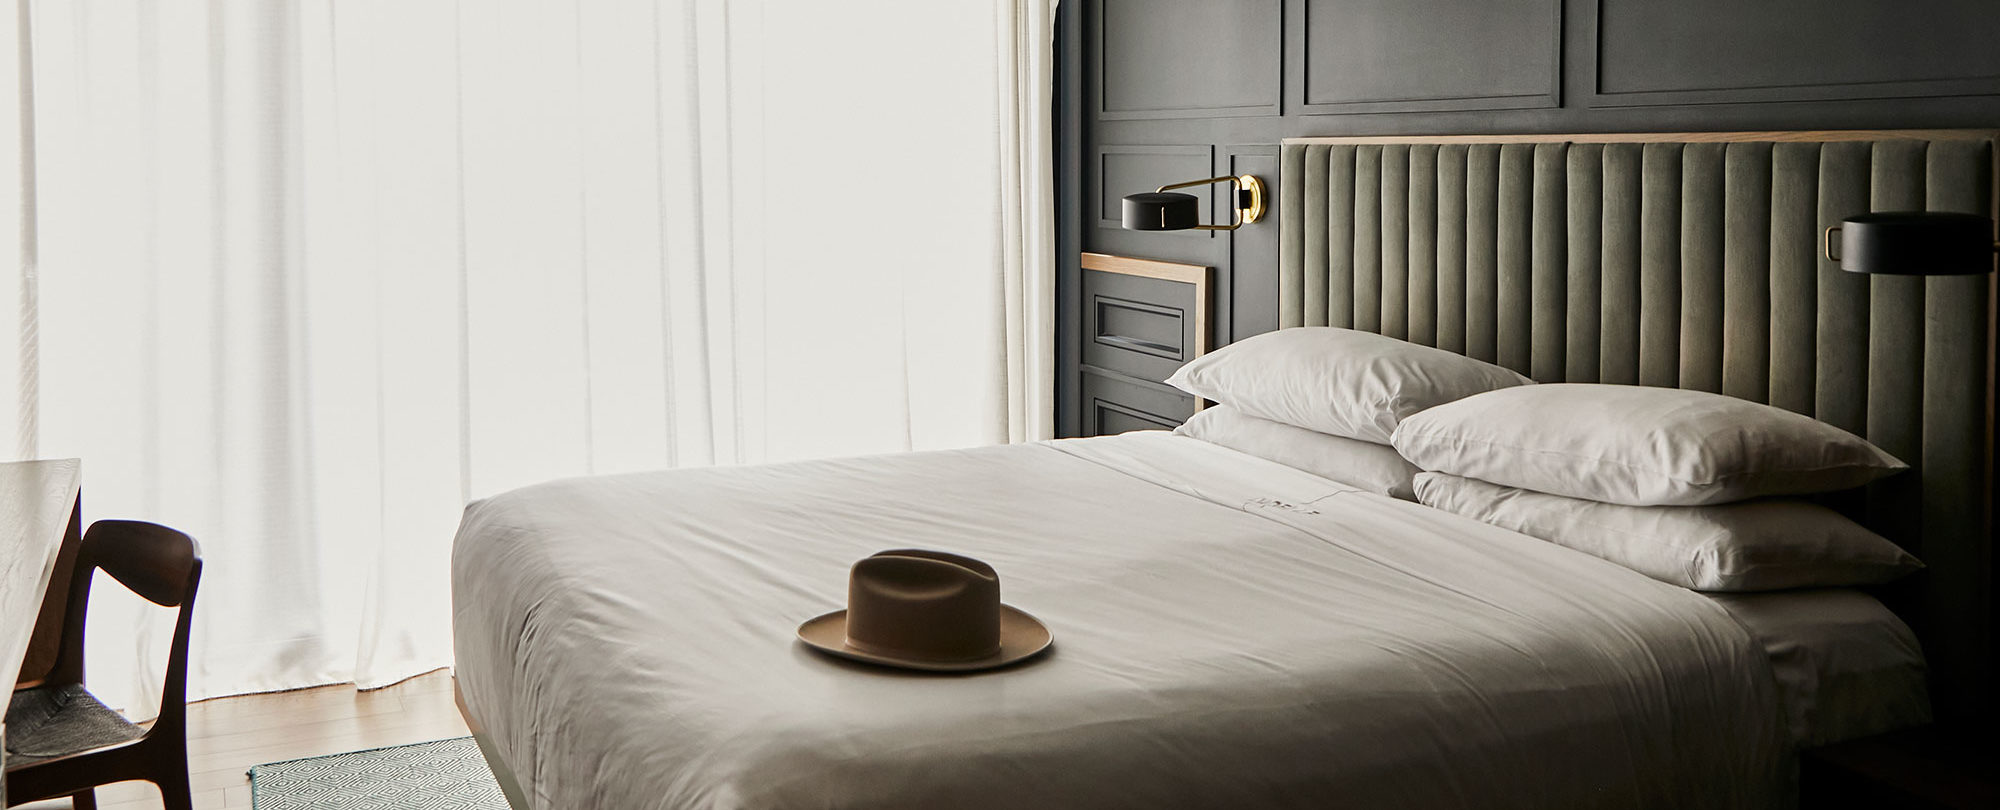 Stetson hat on a guest bed